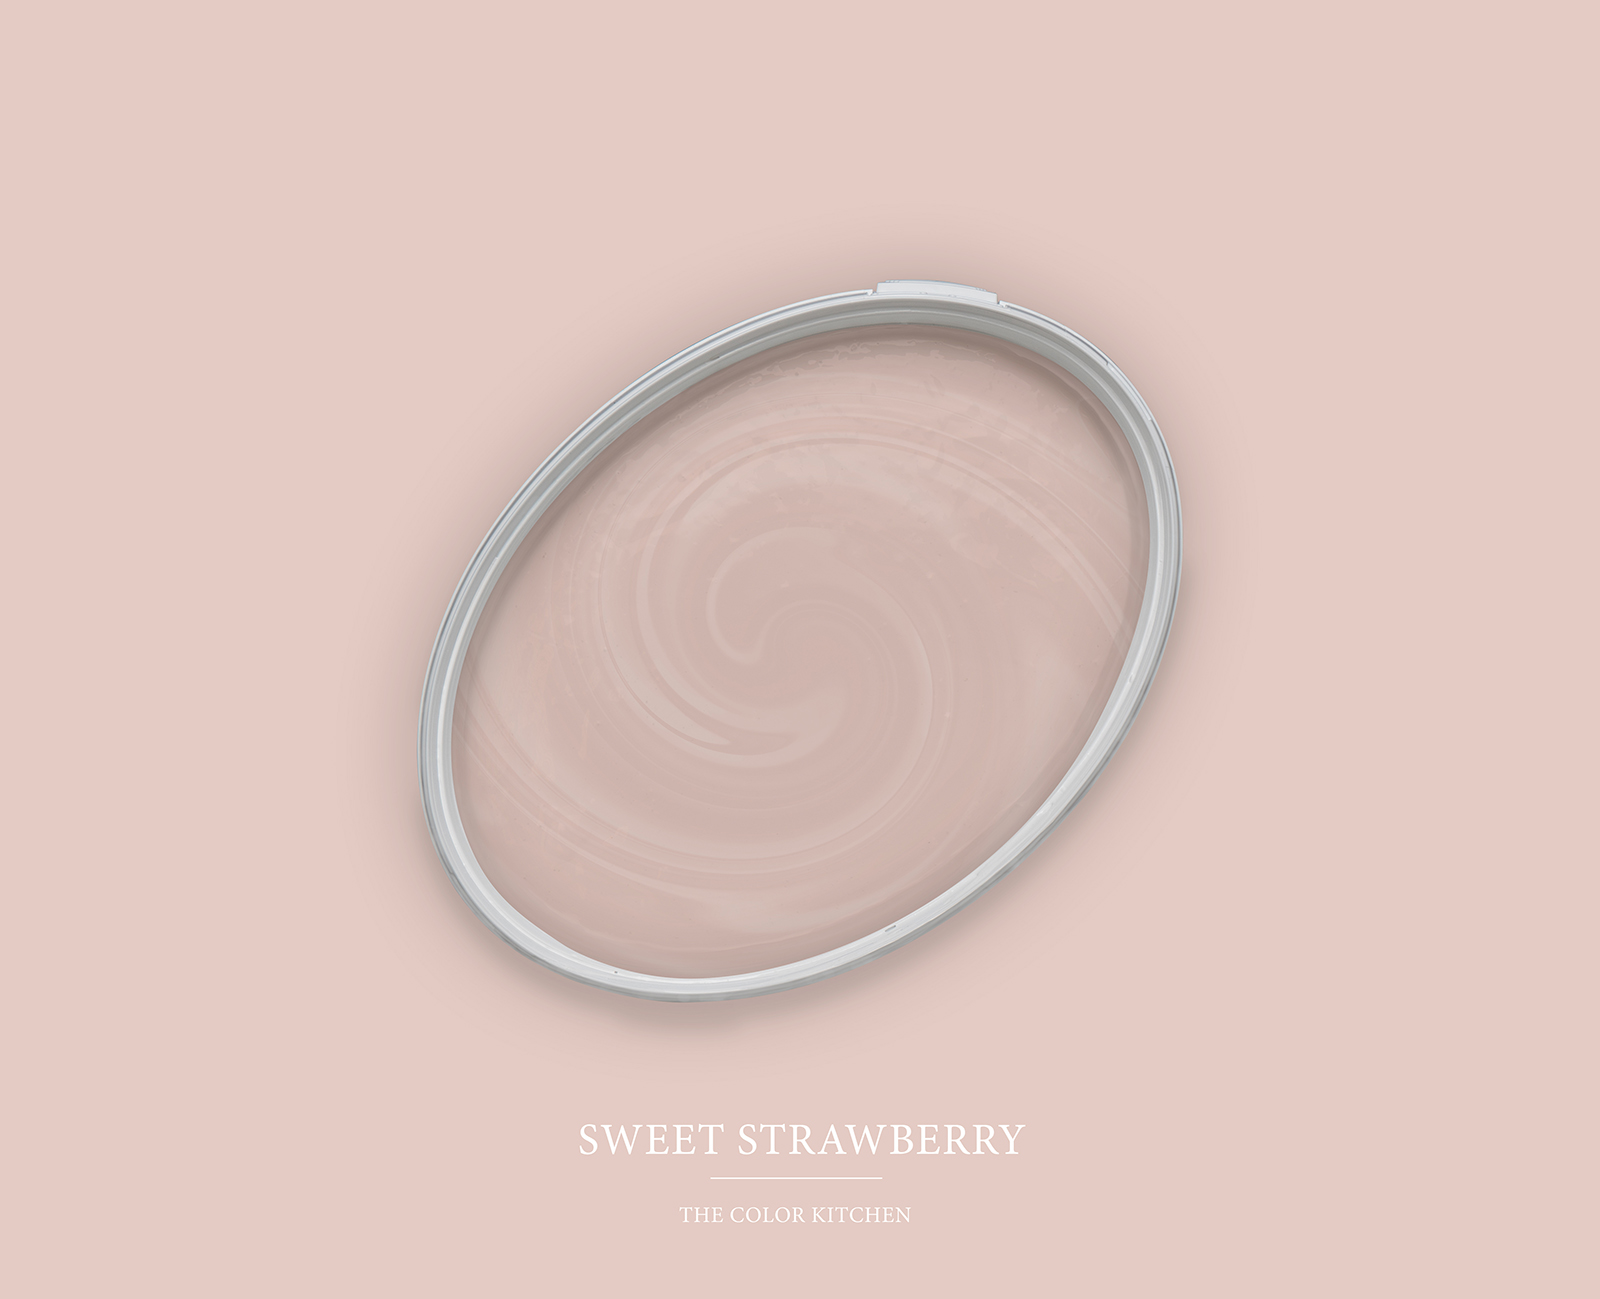 Wall Paint TCK7007 »Sweet Strawberry» an interplay of pink and beige – 5.0 litre
